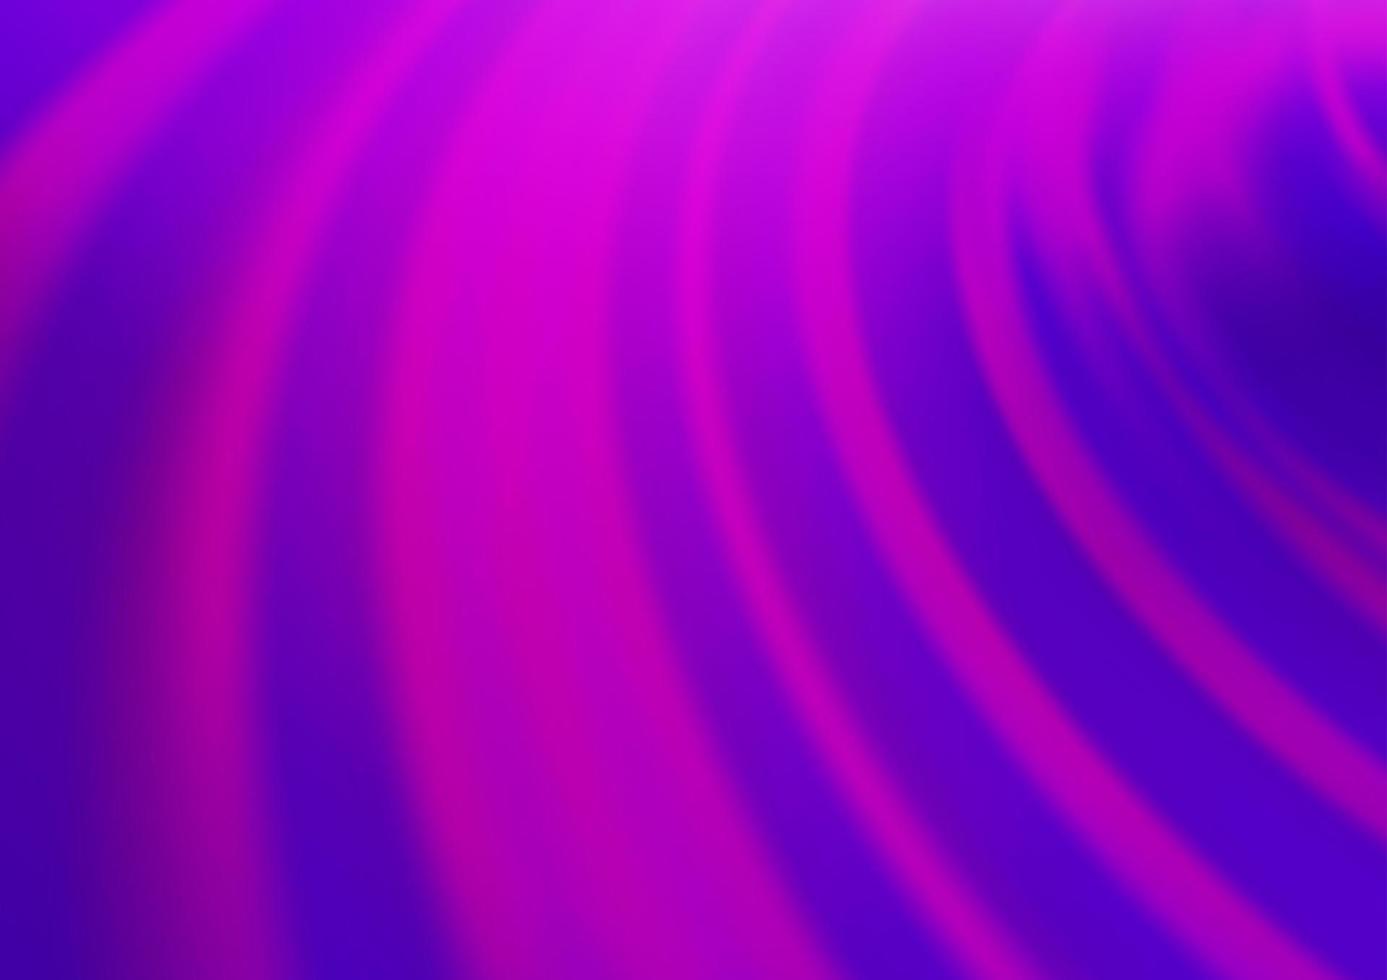 Light Purple vector blurred shine abstract background.